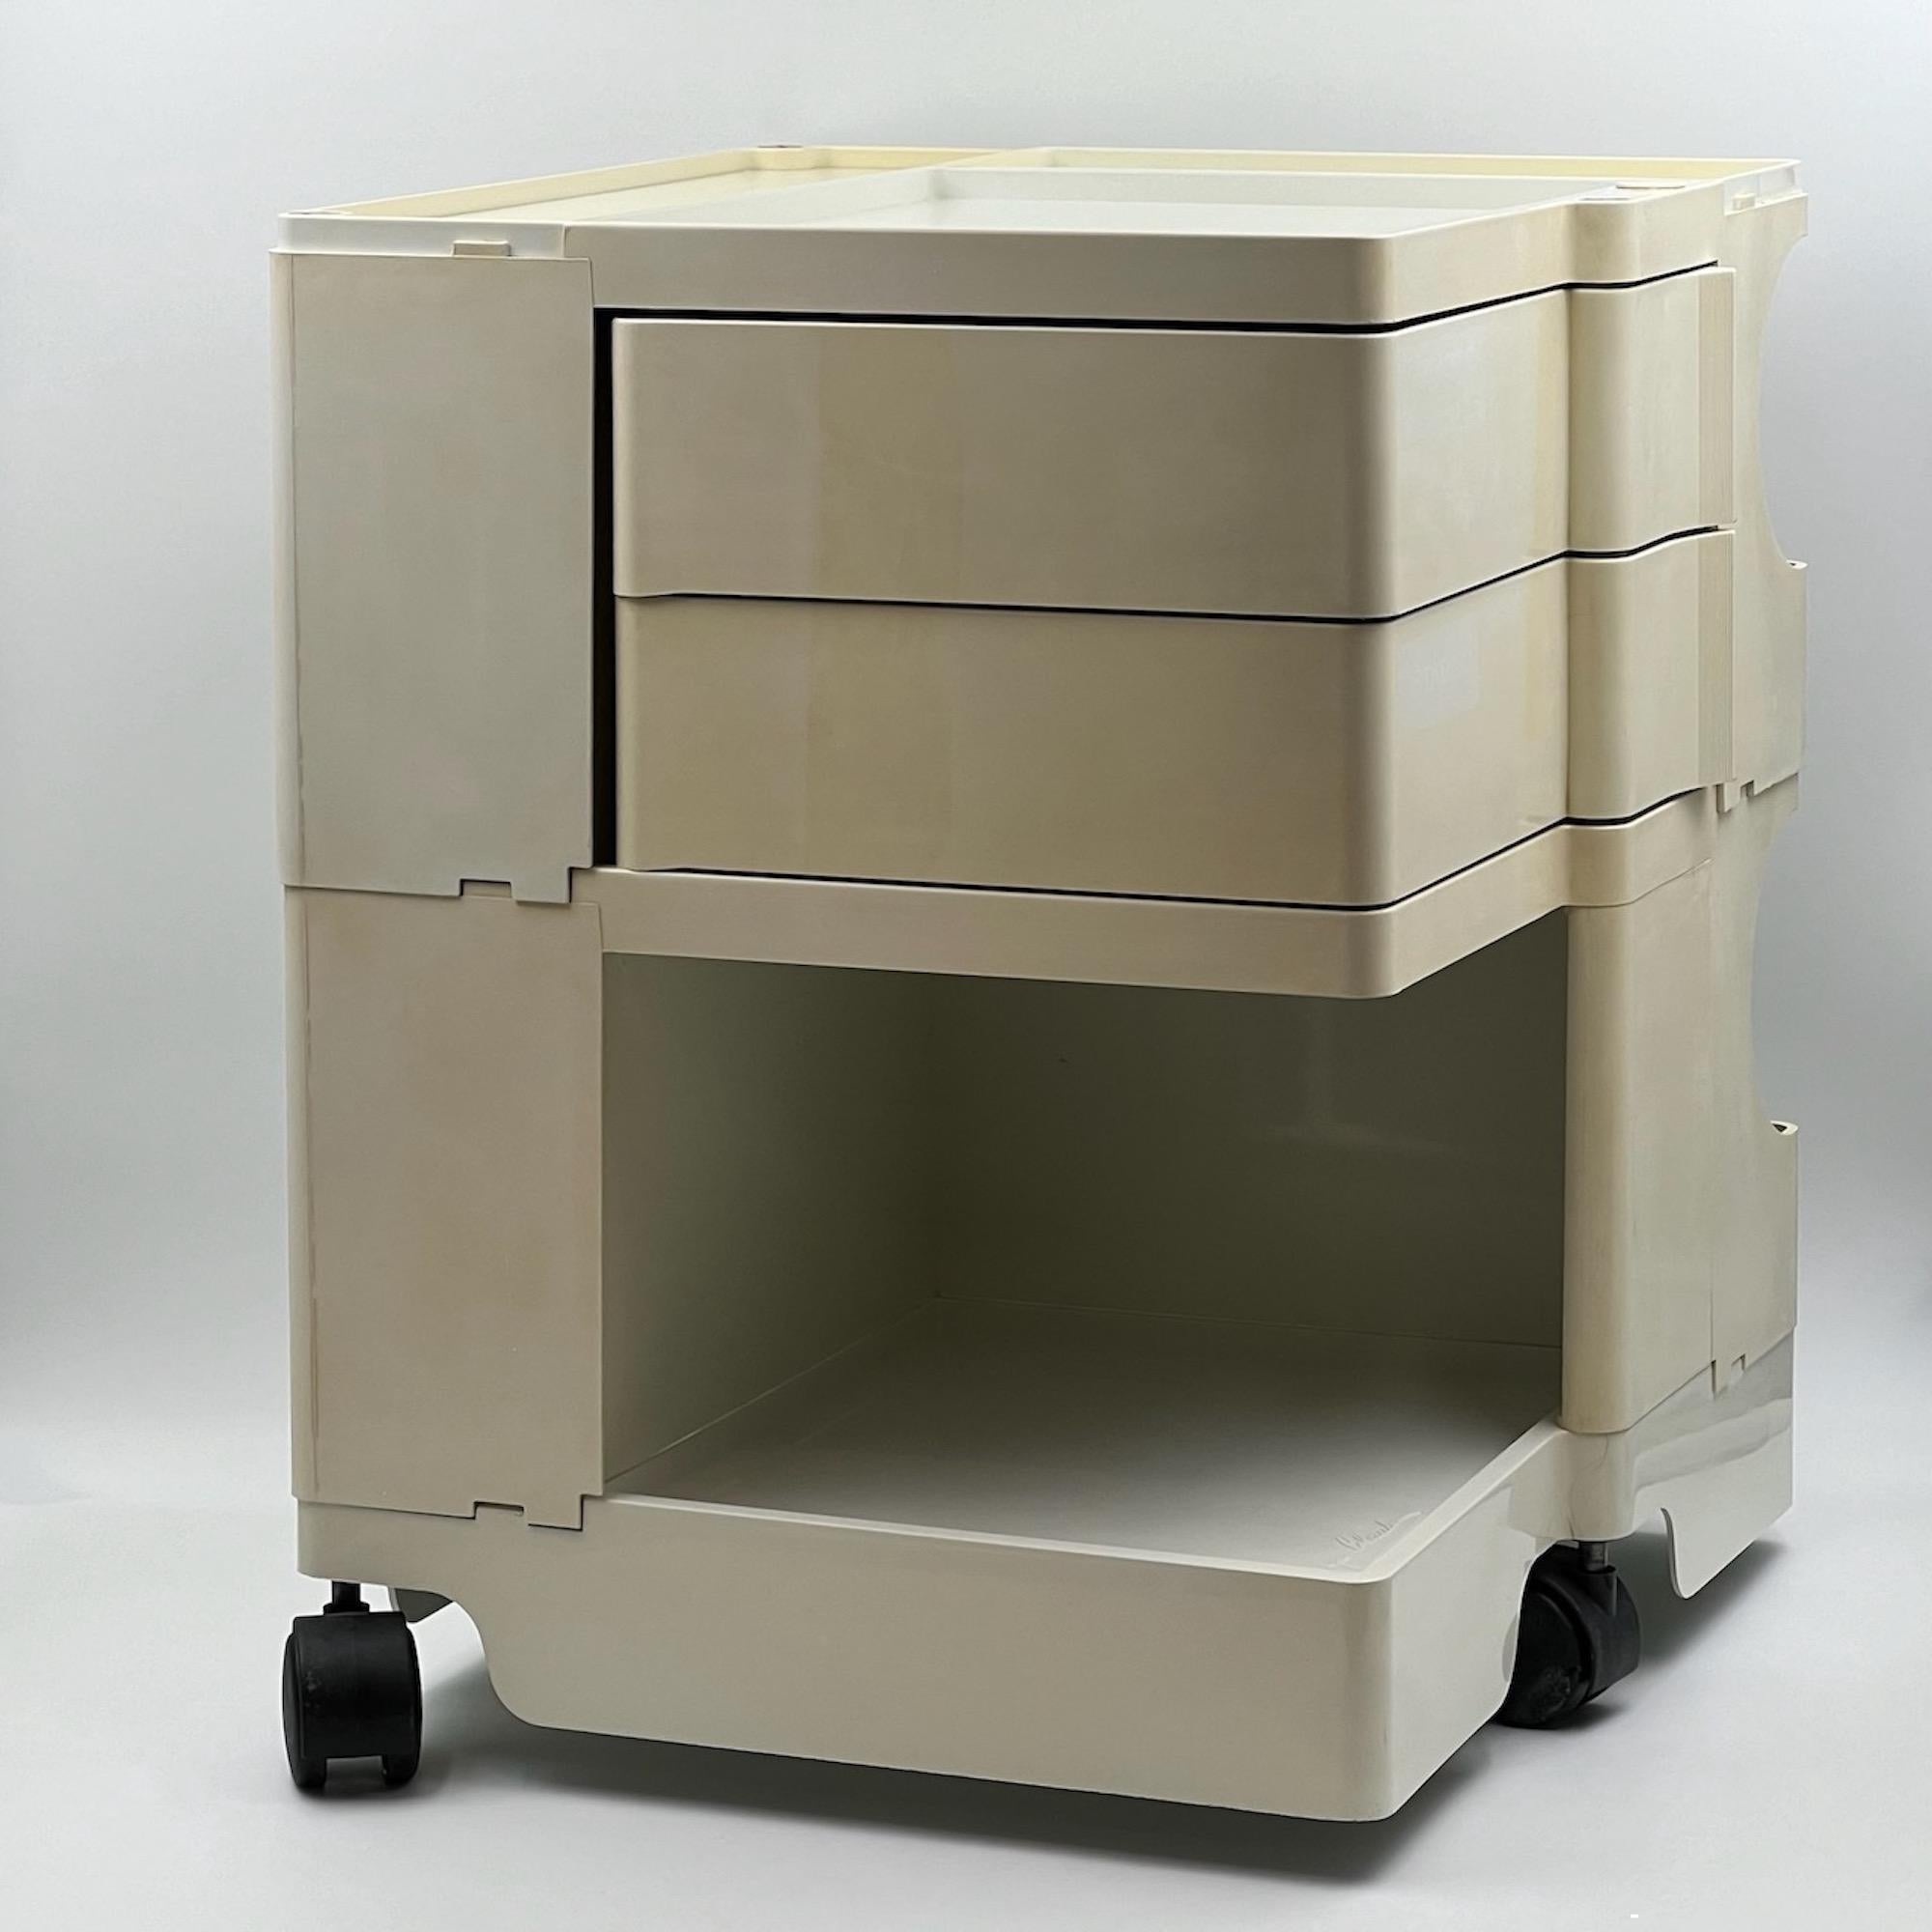 Iconic Boby Trolley by Joe Colombo - Space Age Award Winning Cabinet, 1970s For Sale 3